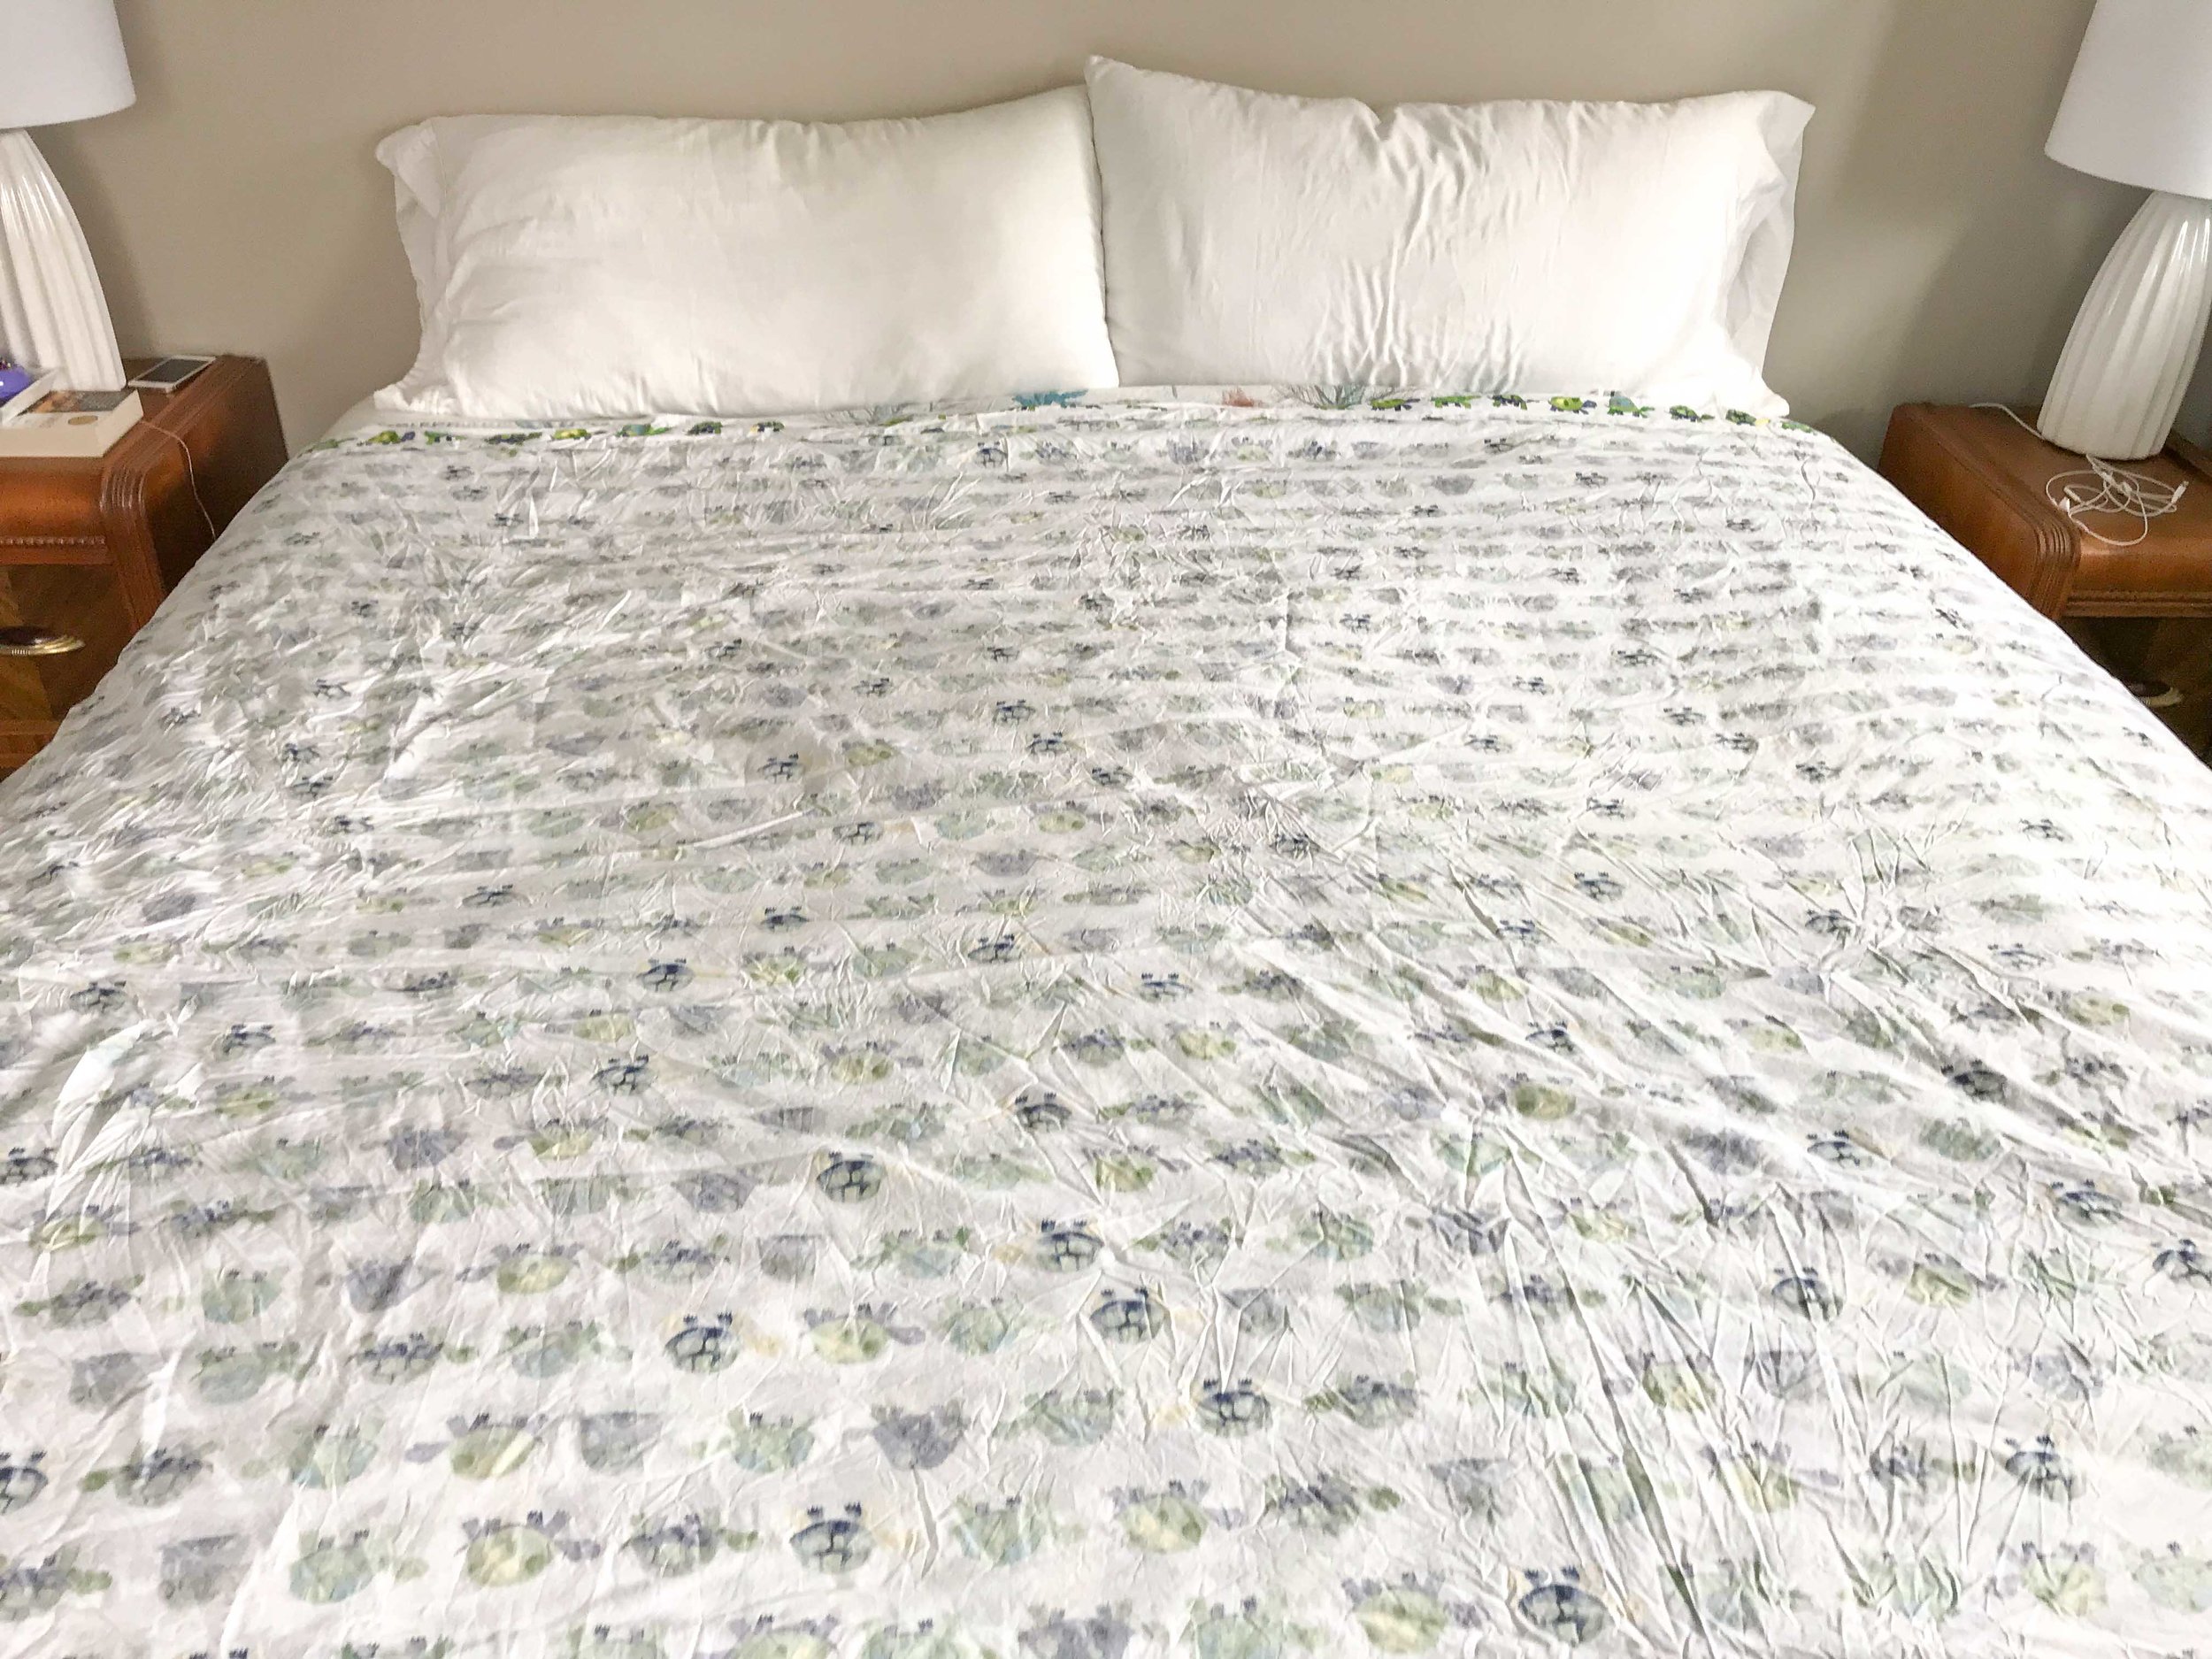 Make A Duvet Cover From Sheets Mid, How To Make A Duvet Cover Using Sheets